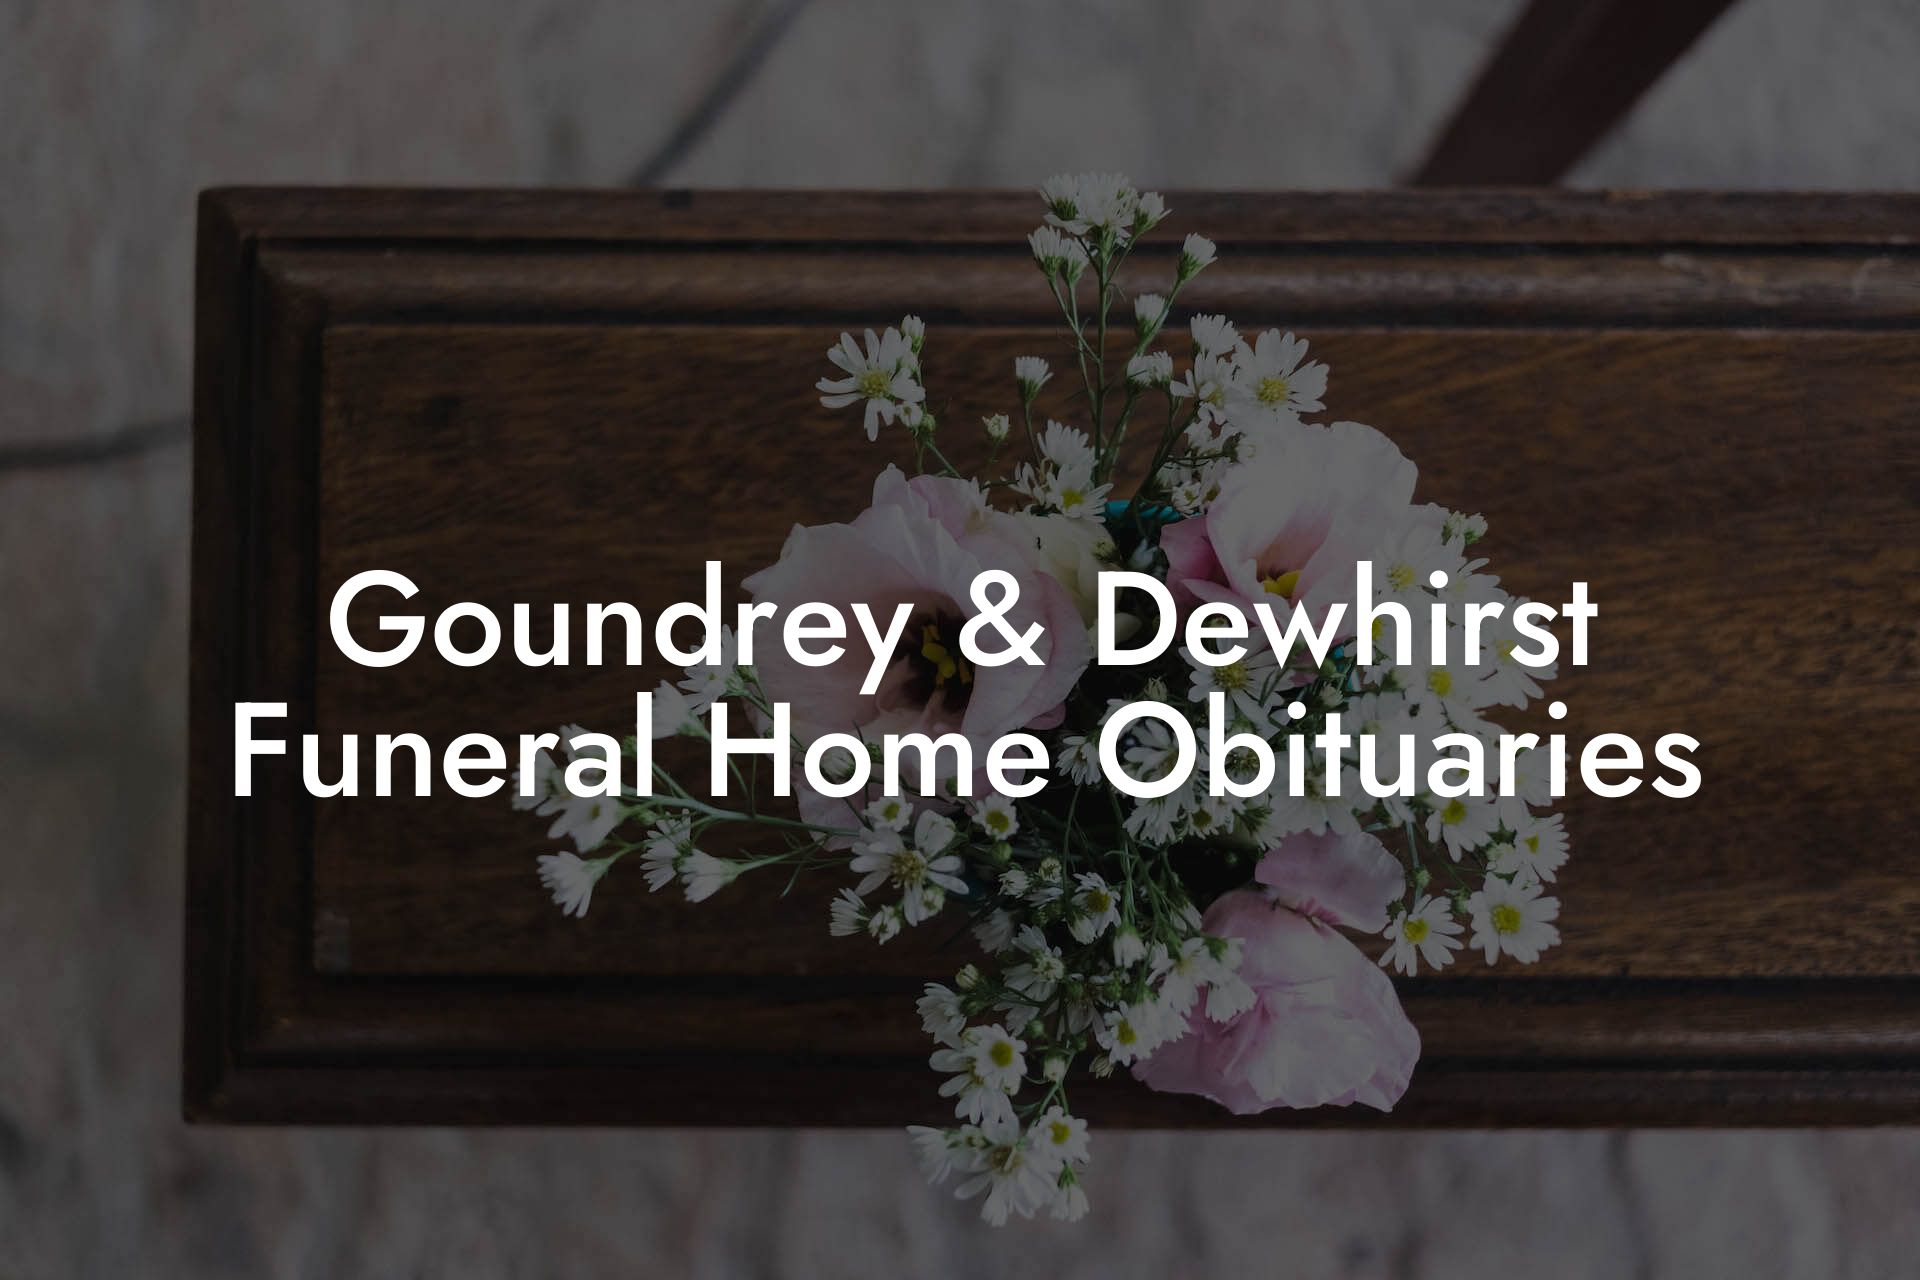 Goundrey & Dewhirst Funeral Home Obituaries